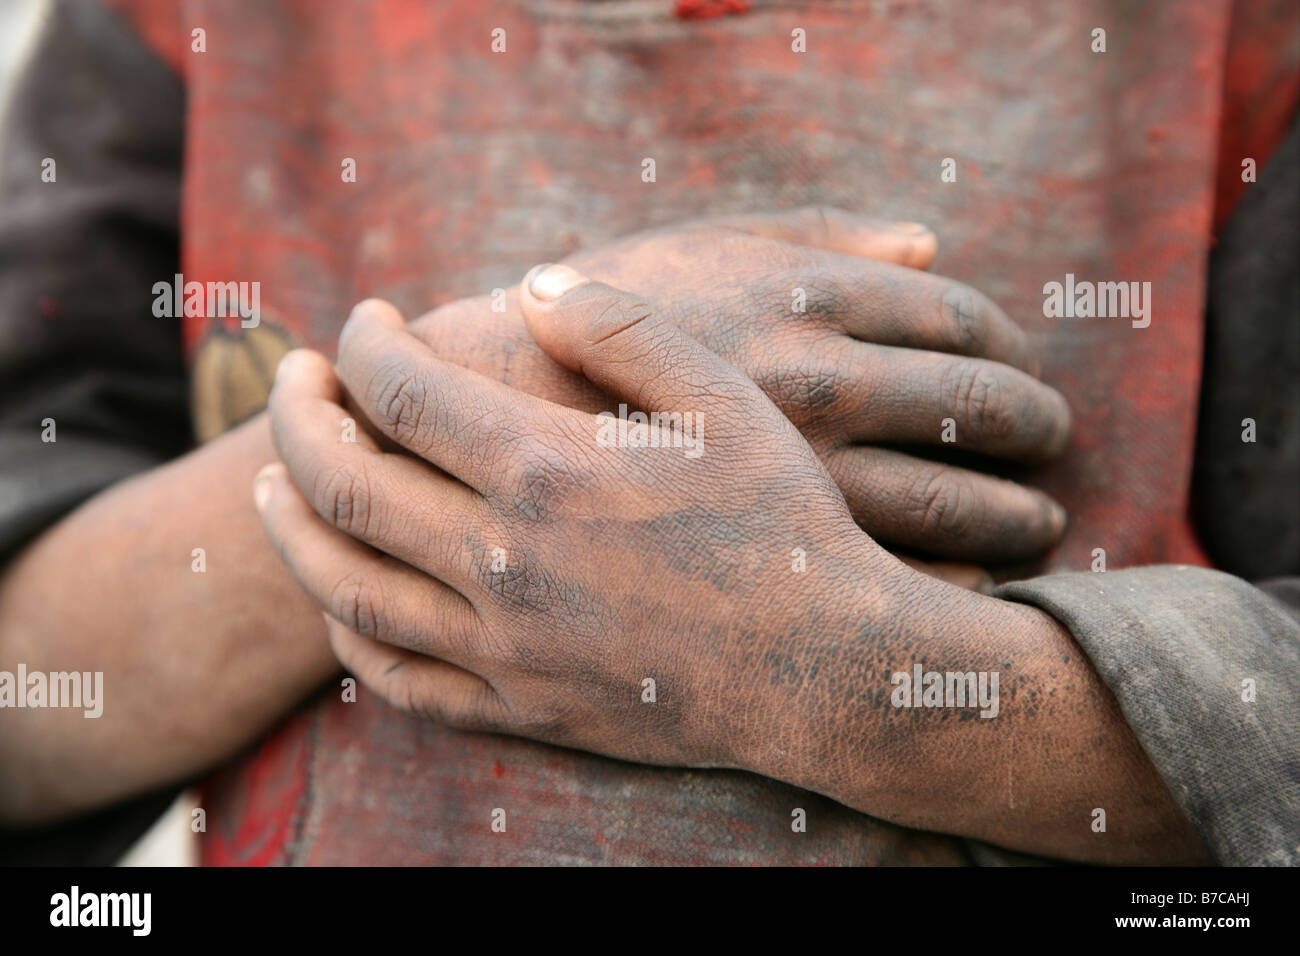 Nepalese boy with filthy hands Stock Photo